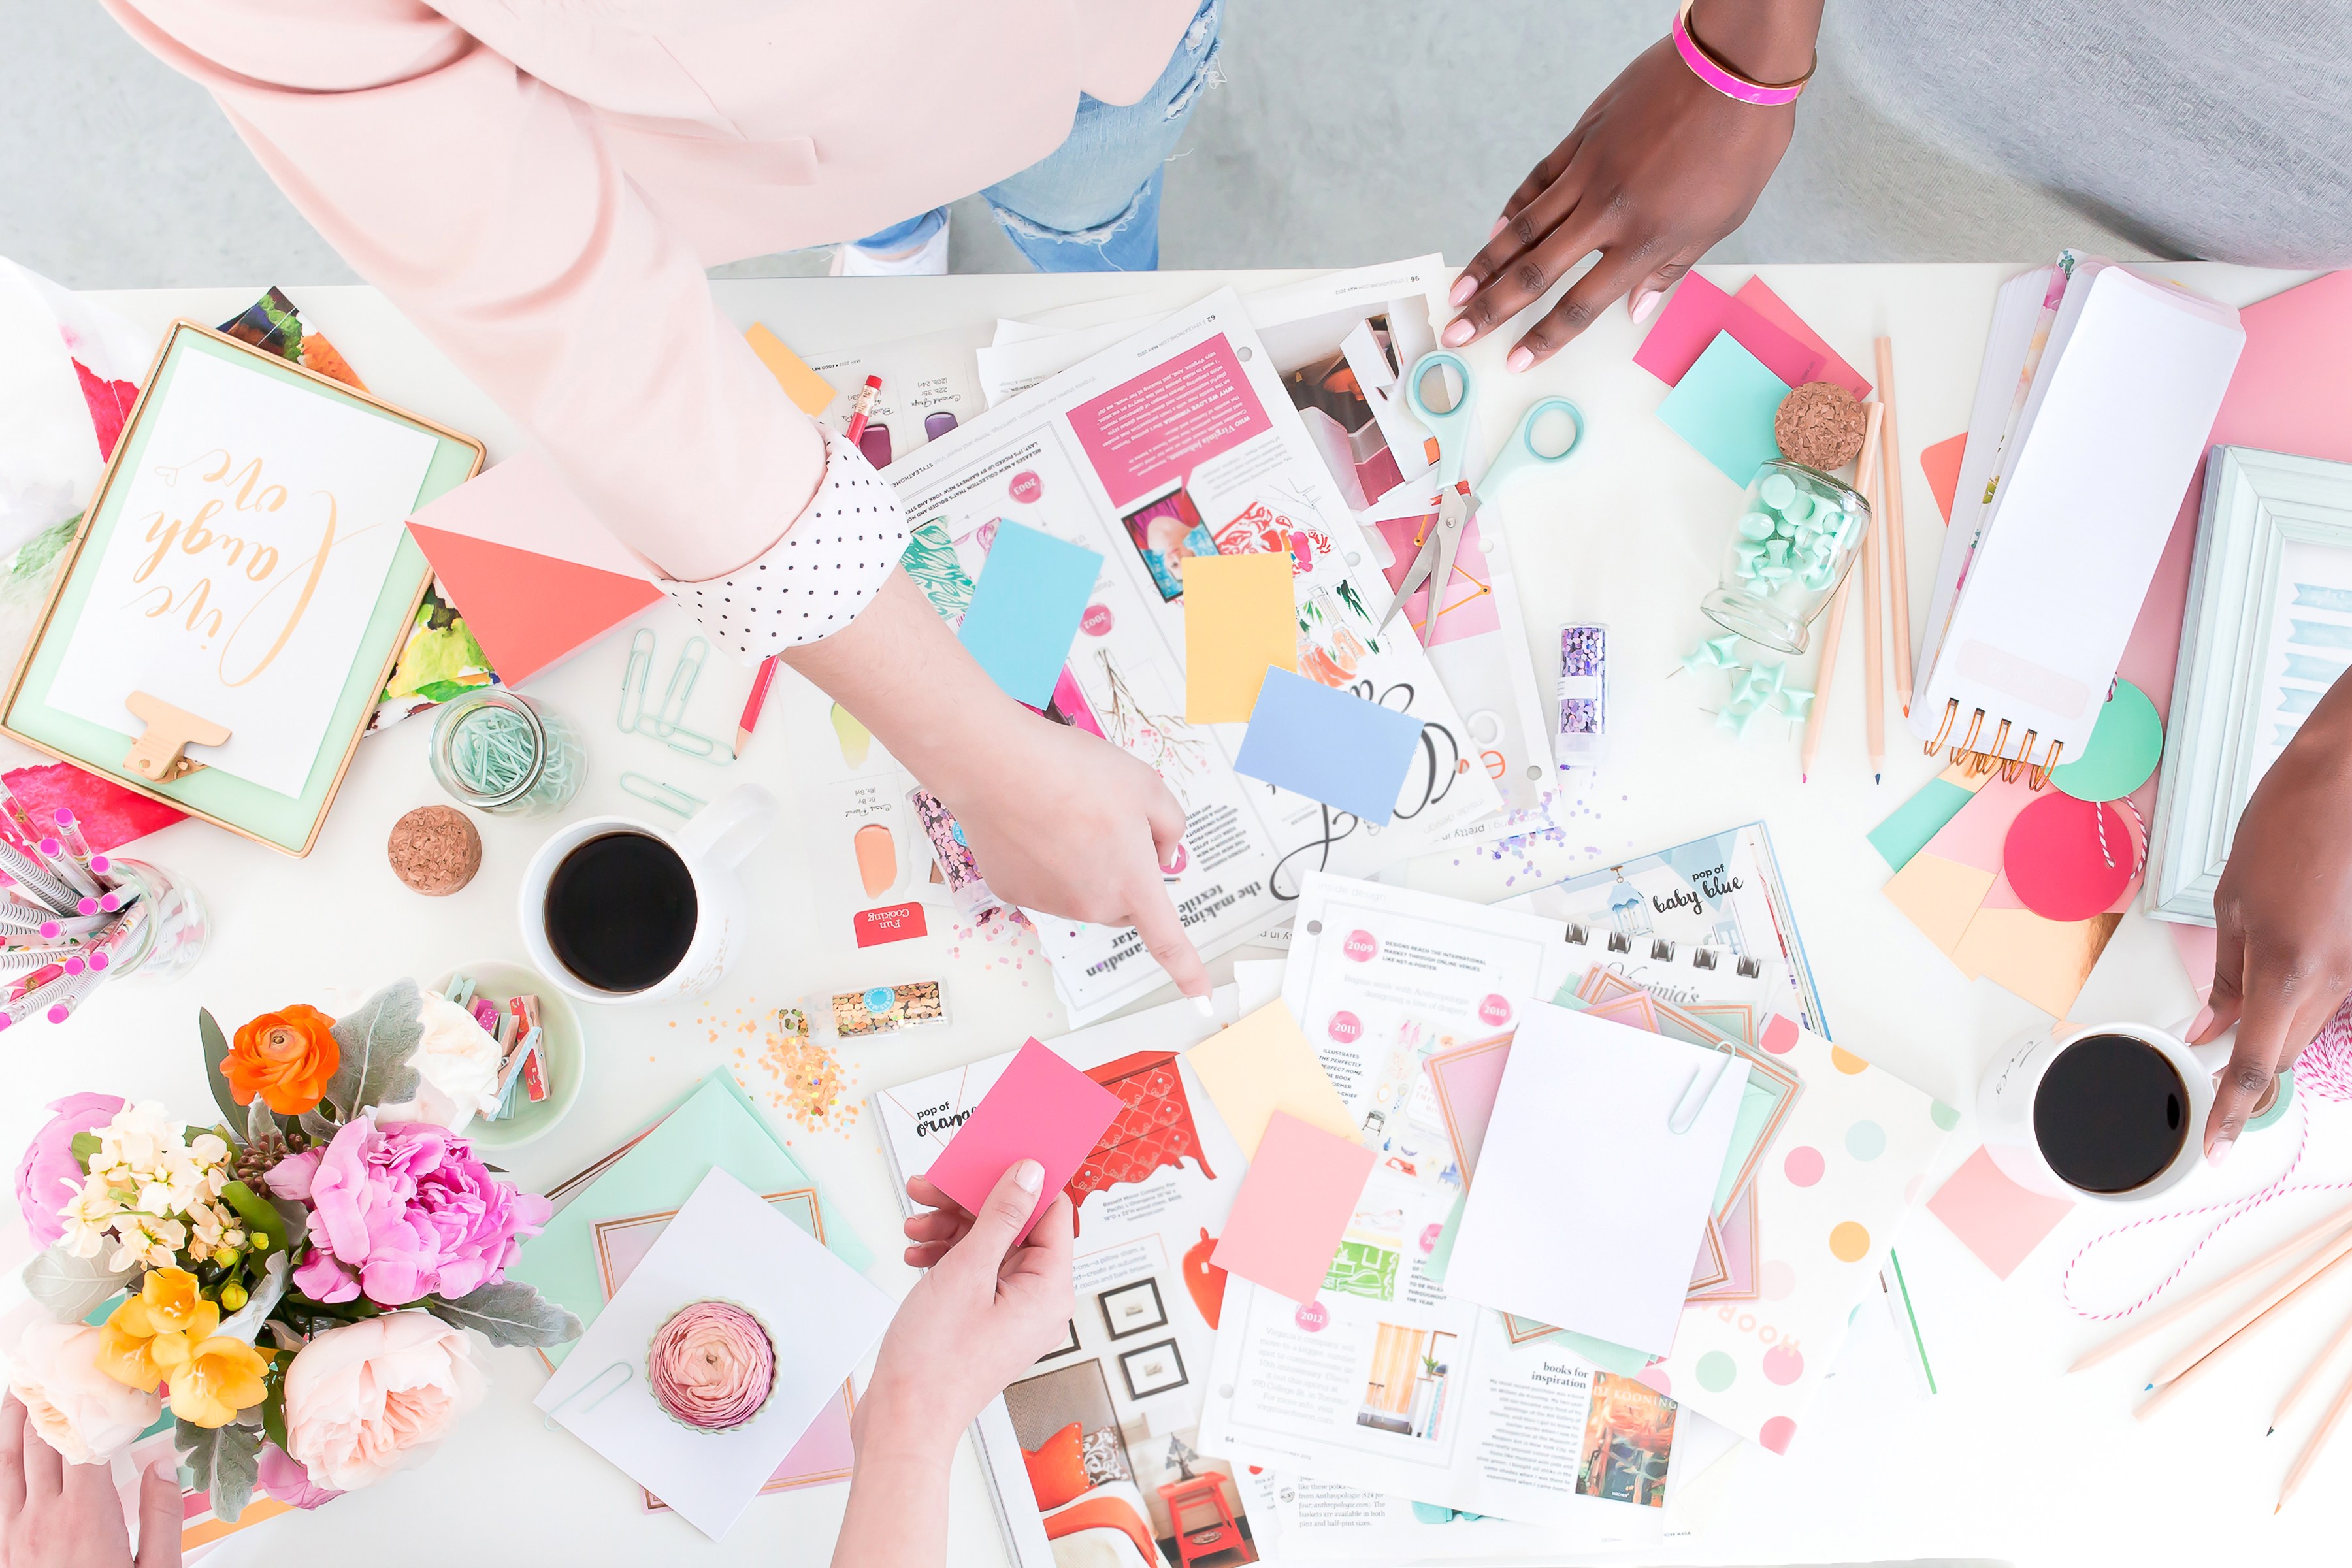 The Best Resources for a Successful Creative Business: Starting a Home Craft Business